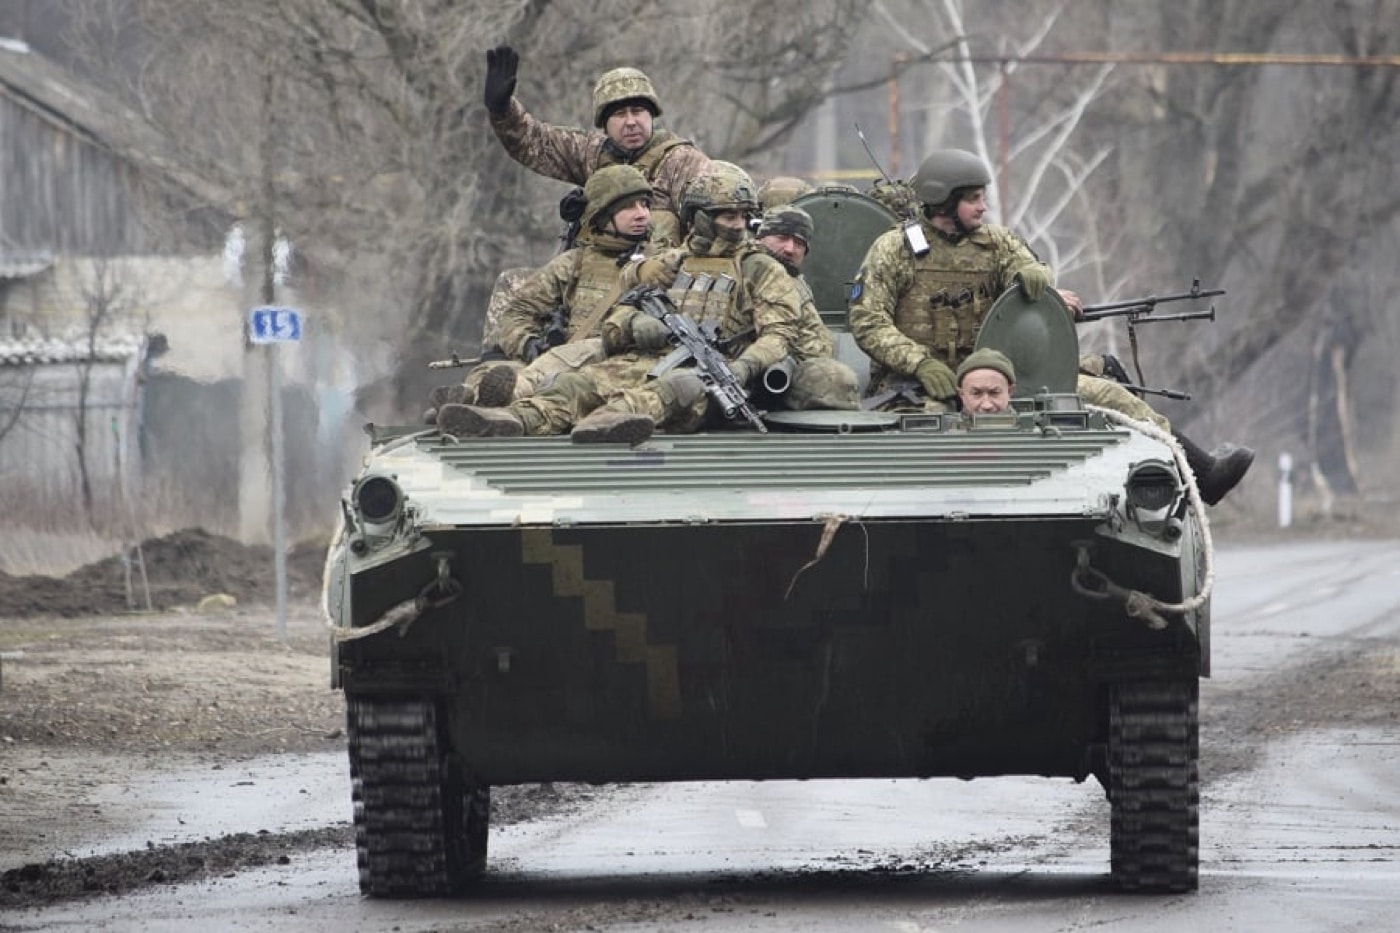 In this photograph, we see Ukrainian infantry riding a BMP-2 infantry fighting vehicle to engage the invaders. The Russian attack threatened the capital city, and these troops helped to stop the invaders in this early battle of the Russo-Ukrainian War. 